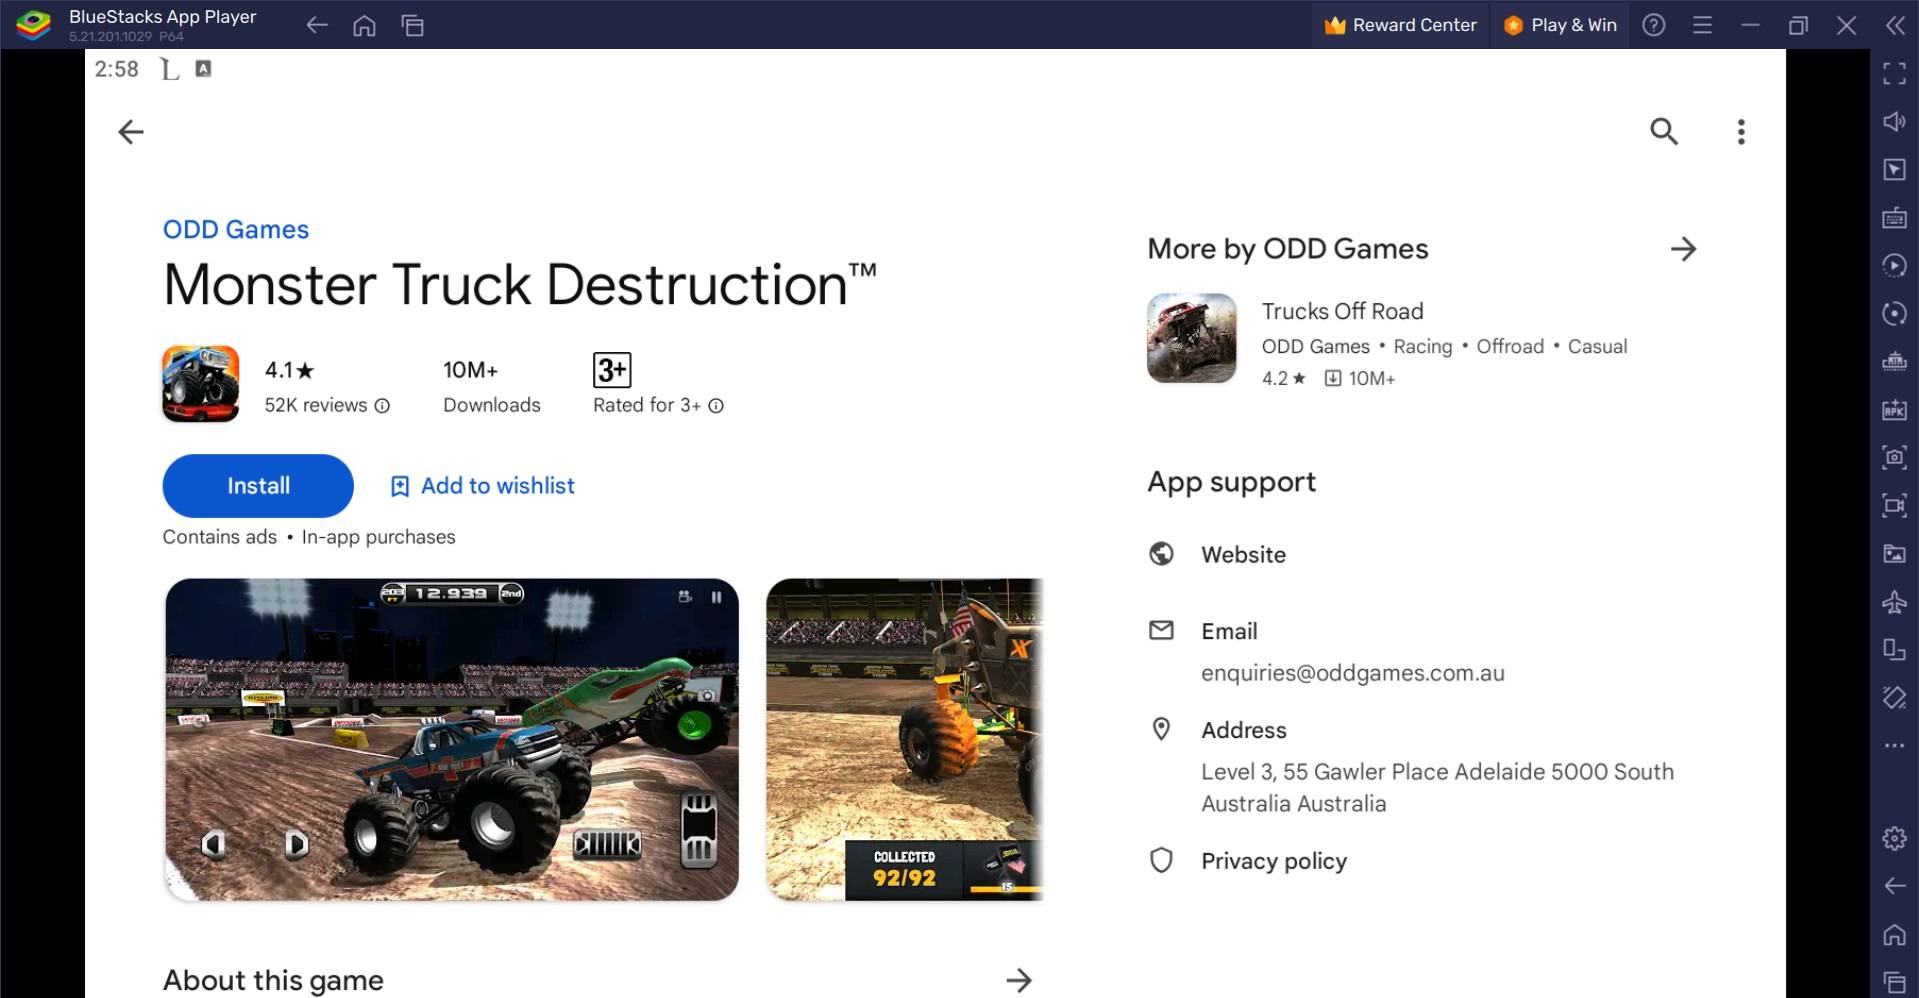 How to Play Monster Truck Destruction on PC with BlueStacks